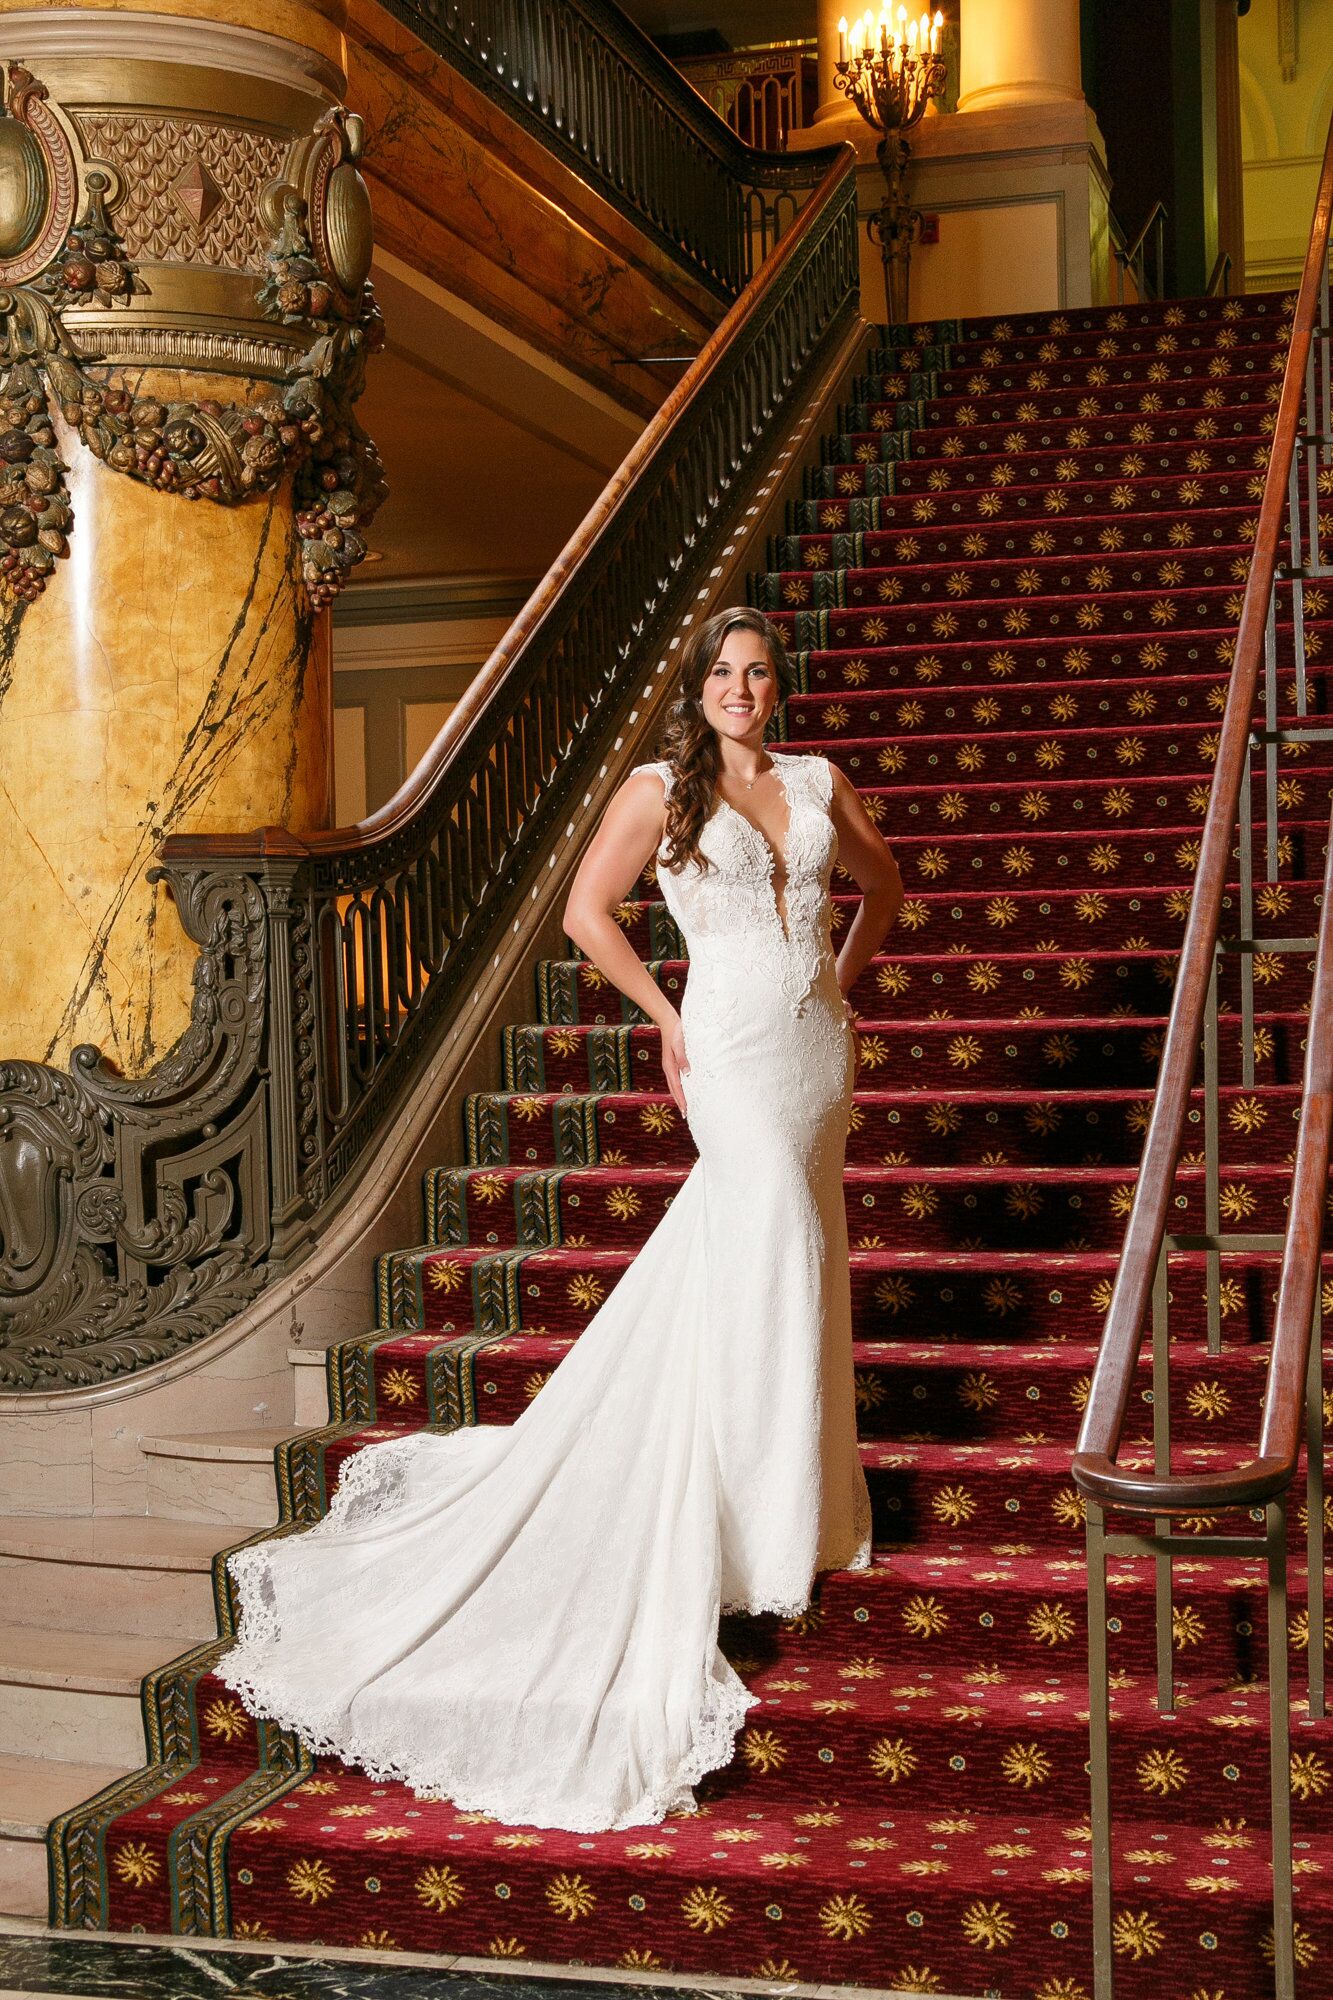 amanda posed on the jefferson hotel staircase